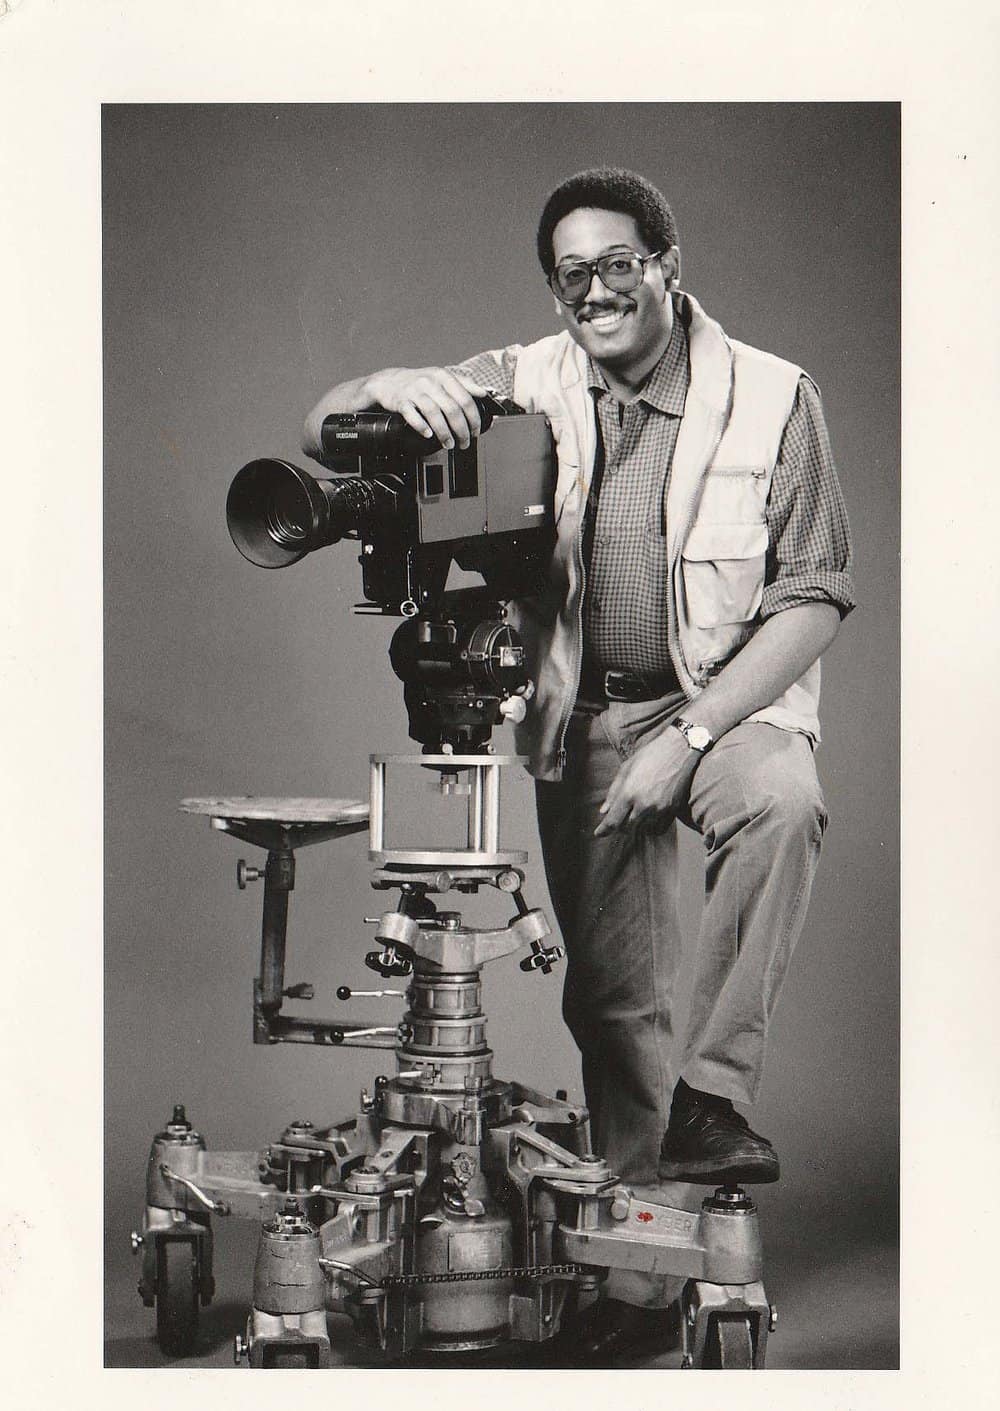  Film producer Tutman 20 years later in a publicity photo. Courtesy of Fred Tutman.  